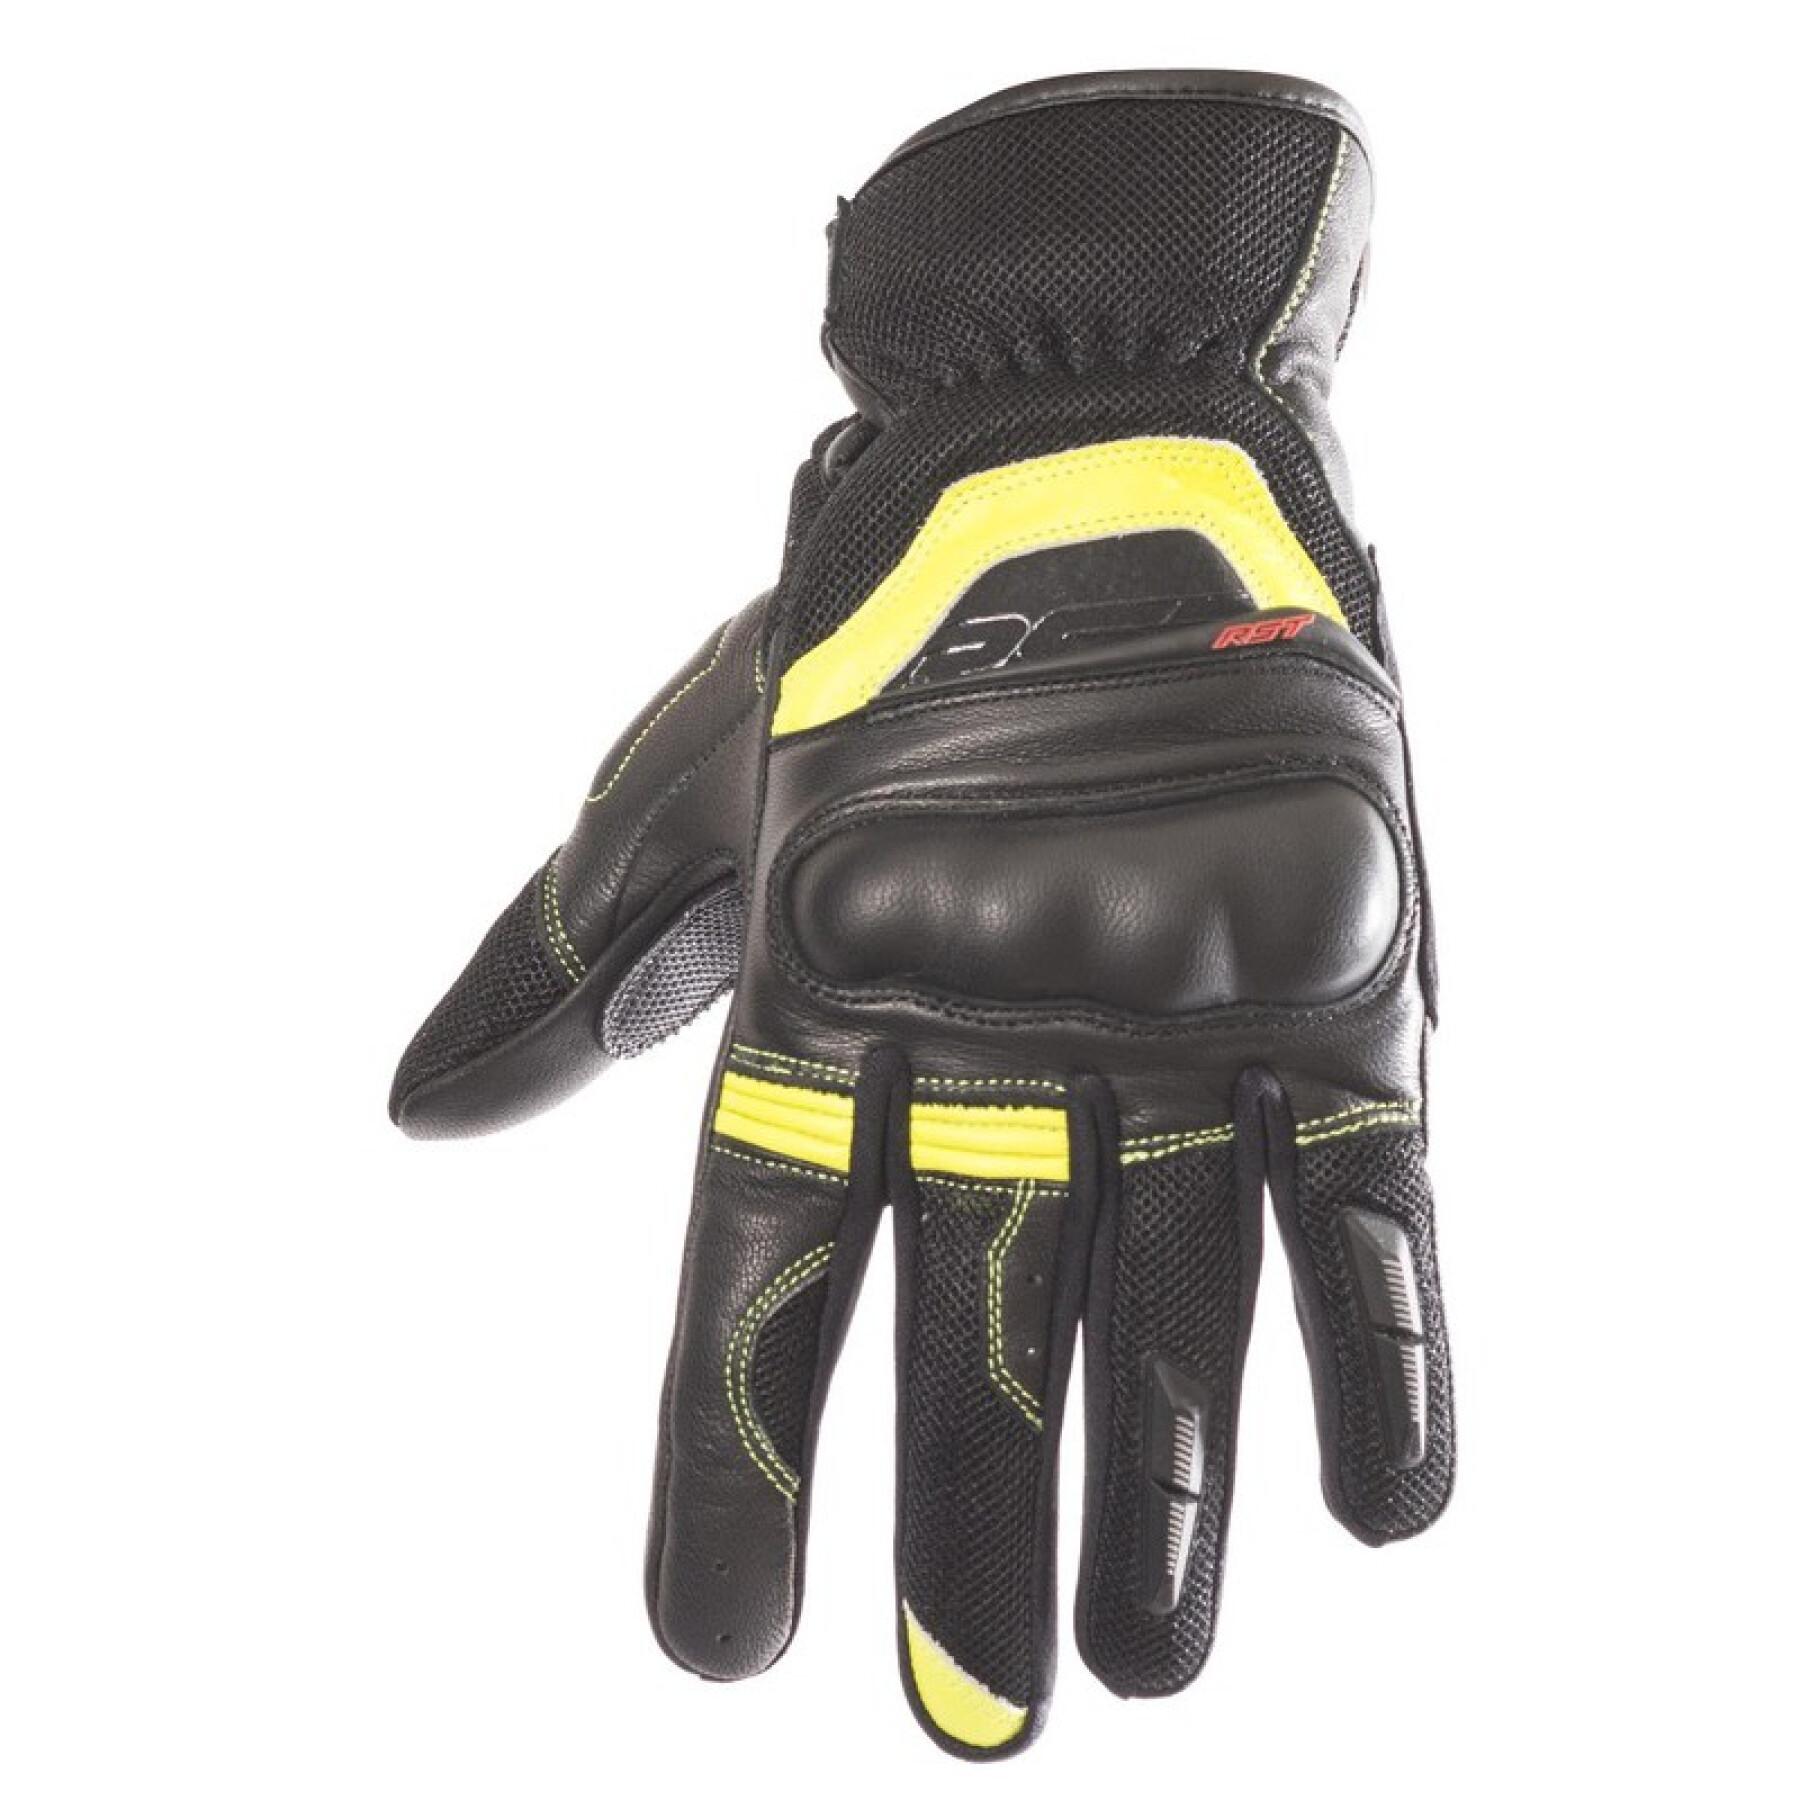 All Colours & Sizes RST Urban Air II CE Summer Motorbike Motorcycle Gloves 